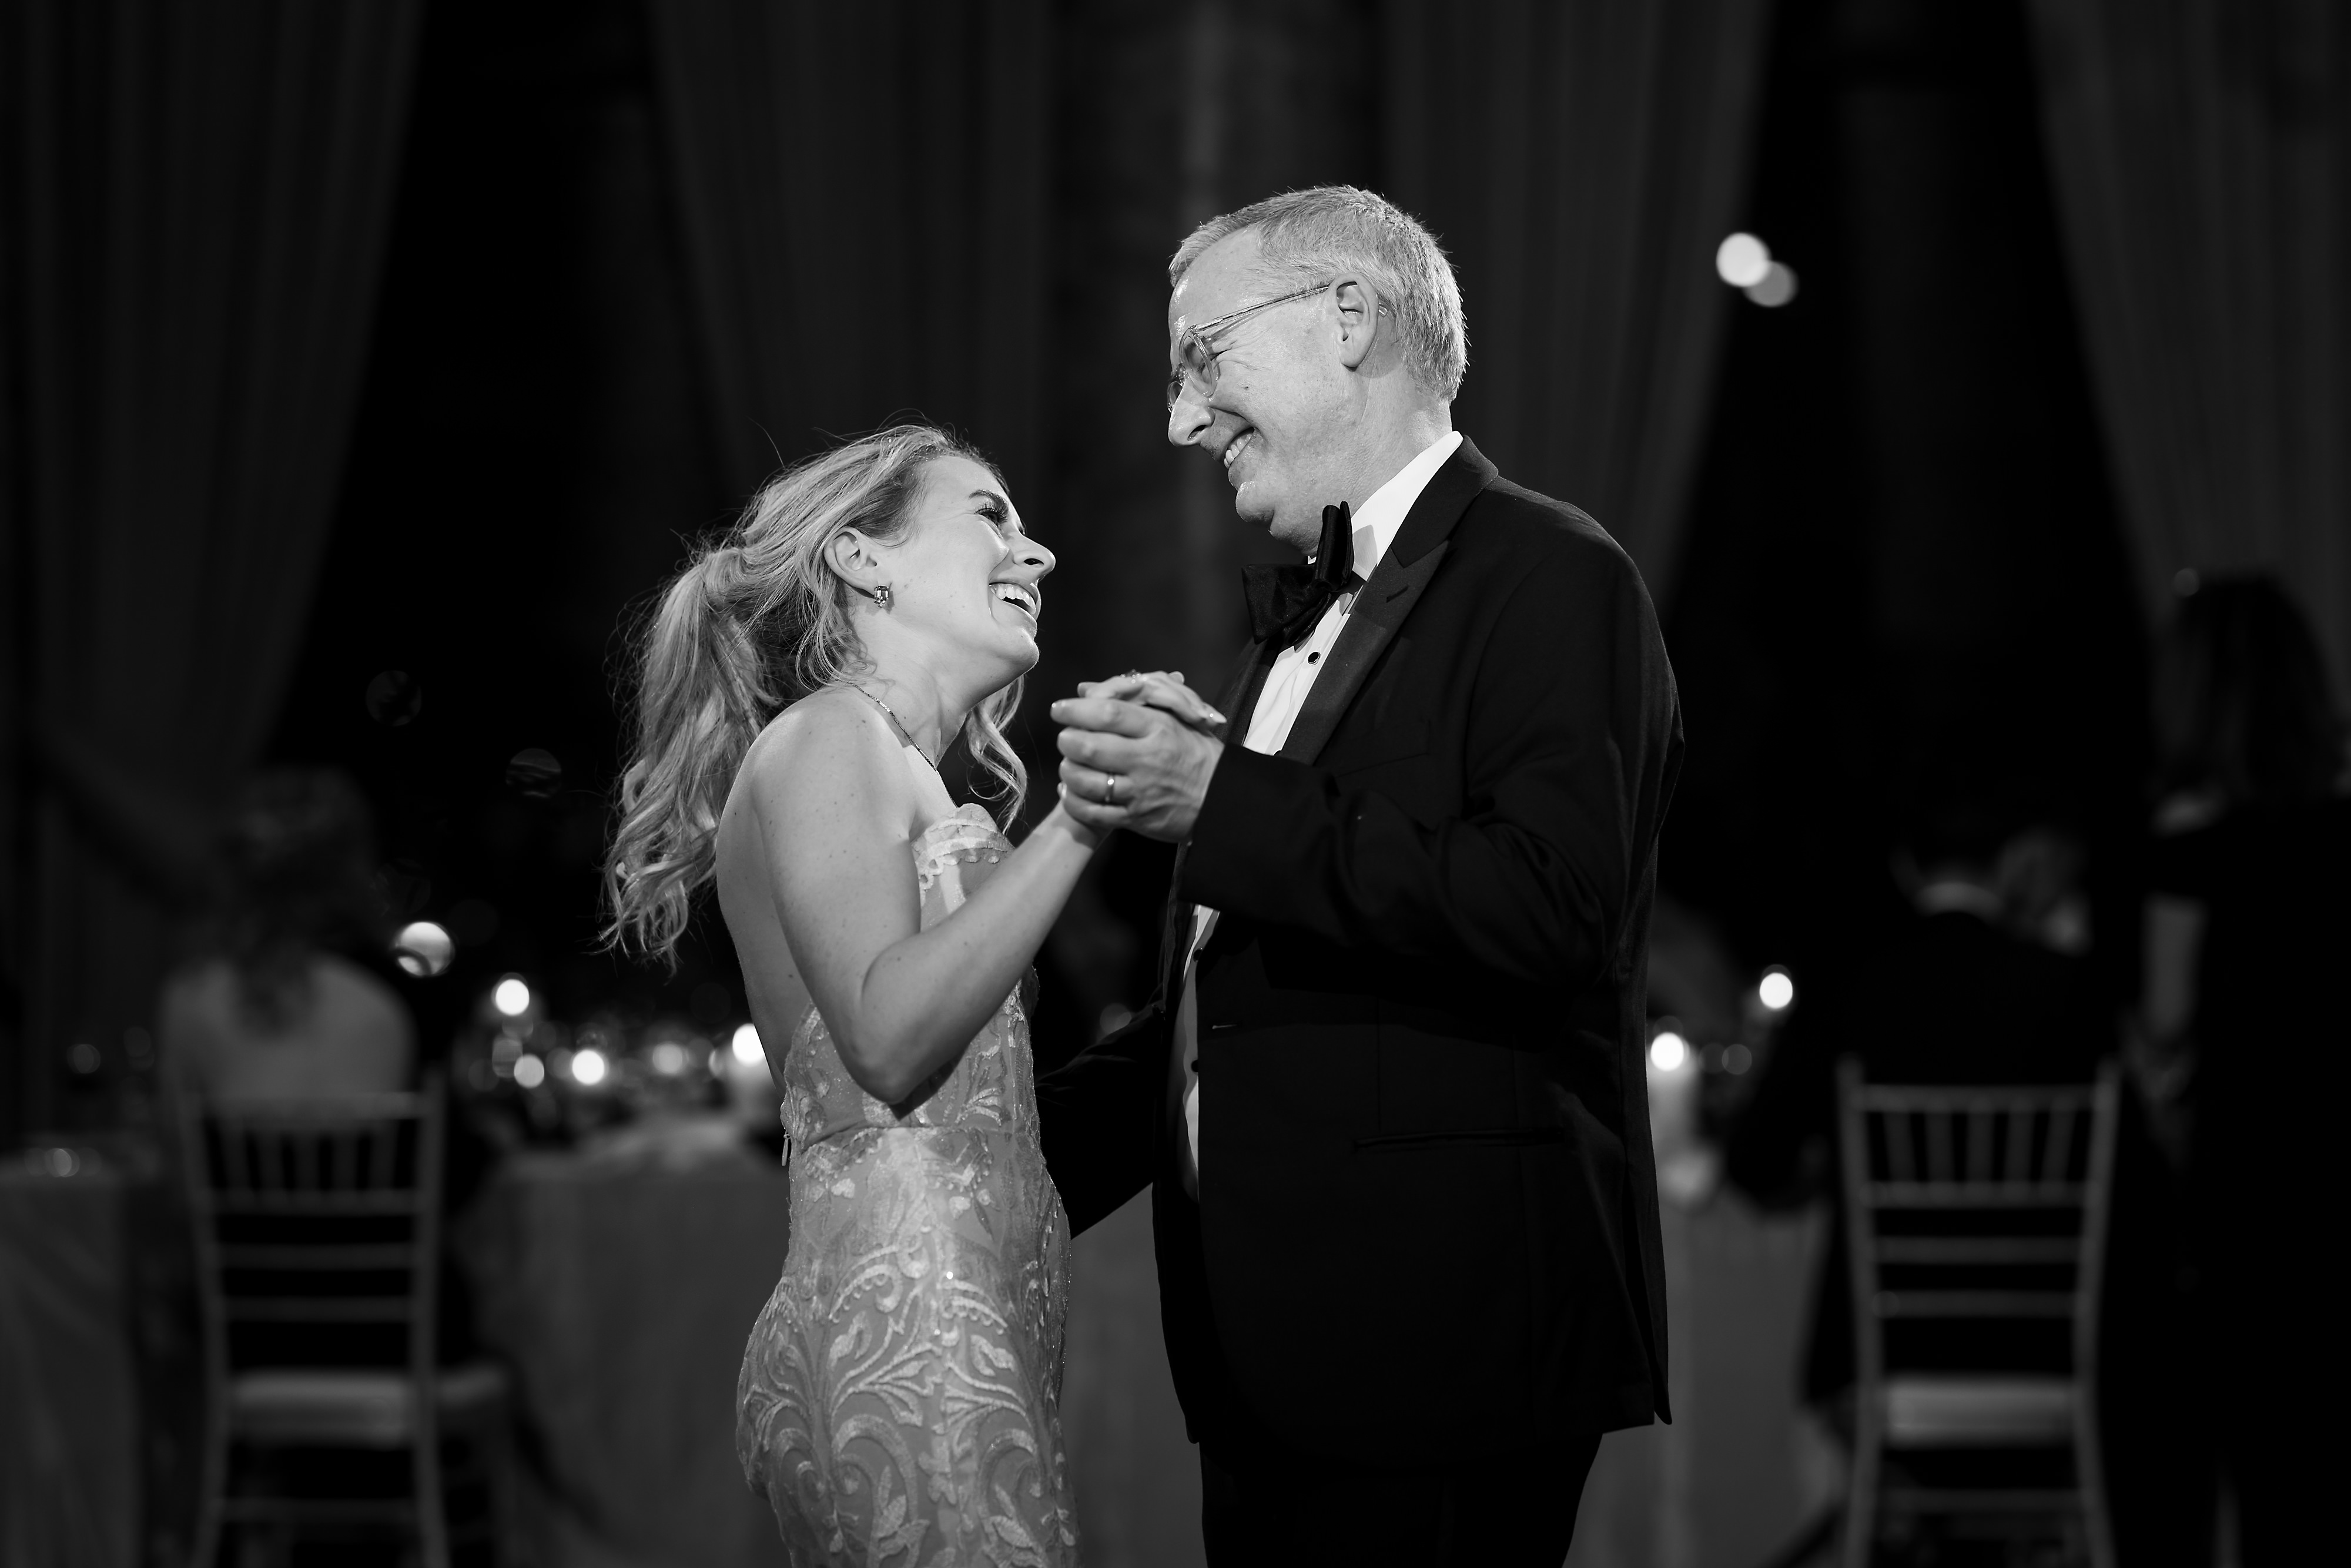 Bride and father share first dance during wedding reception in the Grand Ballroom at The Drake Hotel in Chicago